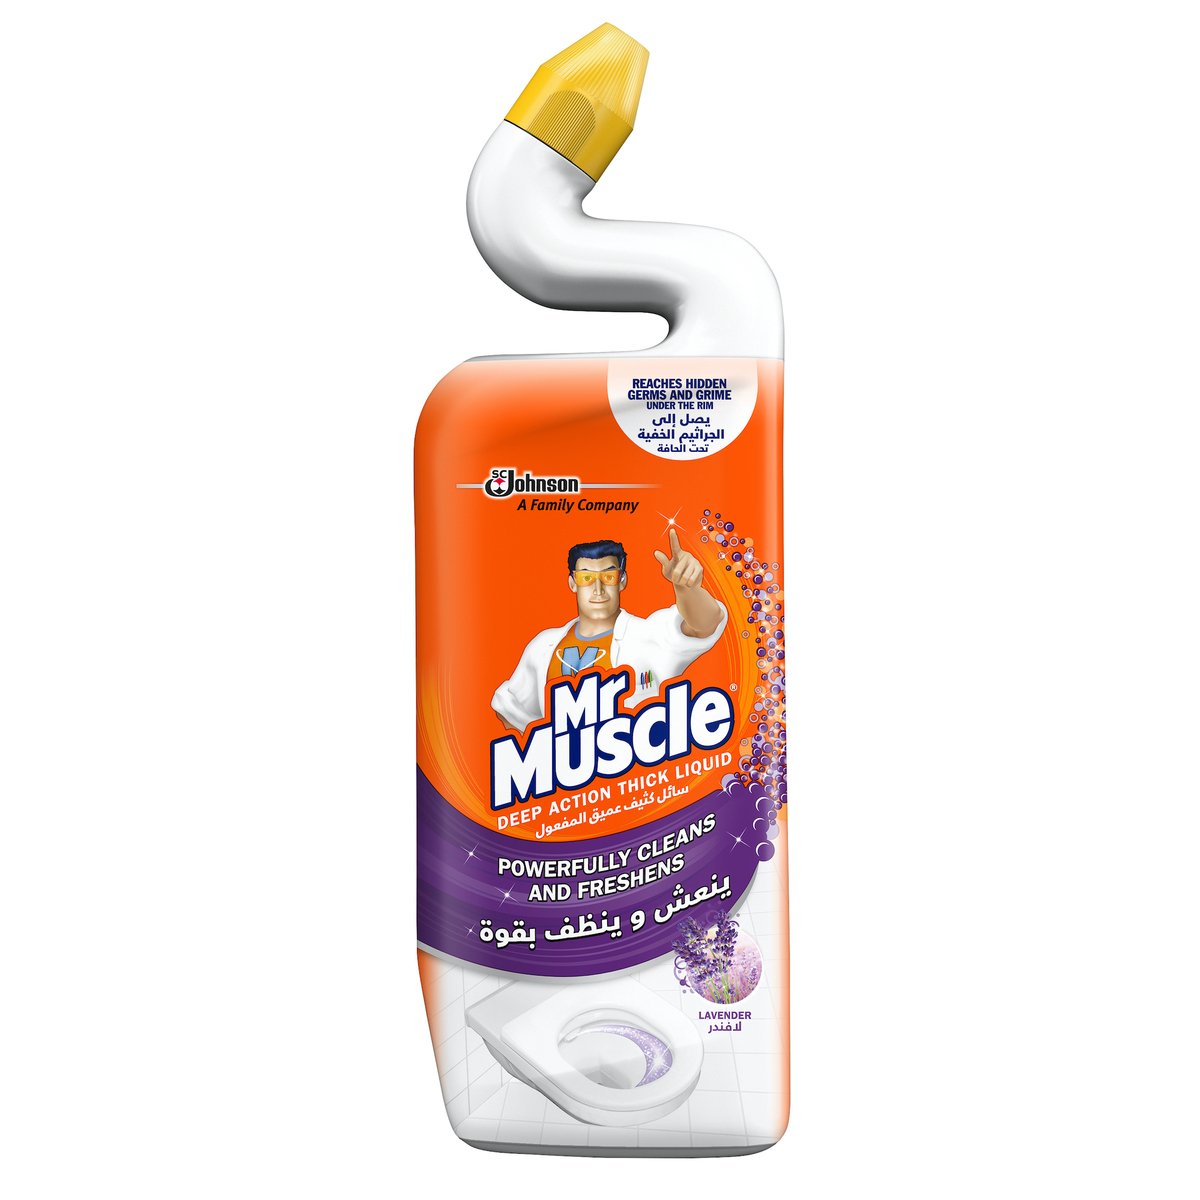 Mr. Muscle Deep Action Thick Liquid Toilet Cleaner Lavender 750ml